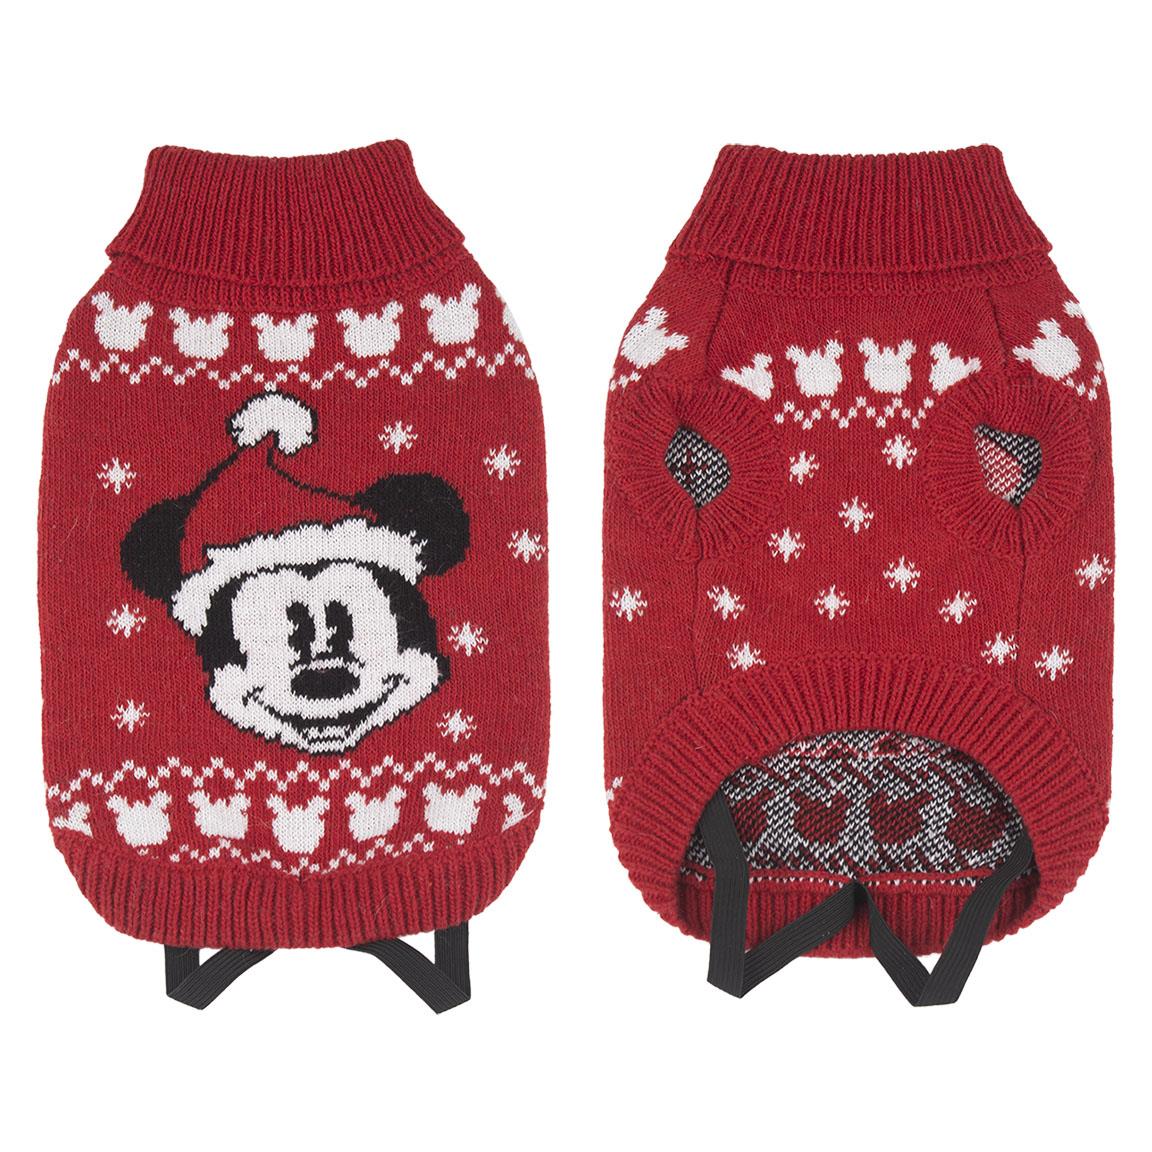 DOG SWEATER KNITTED MICKEY